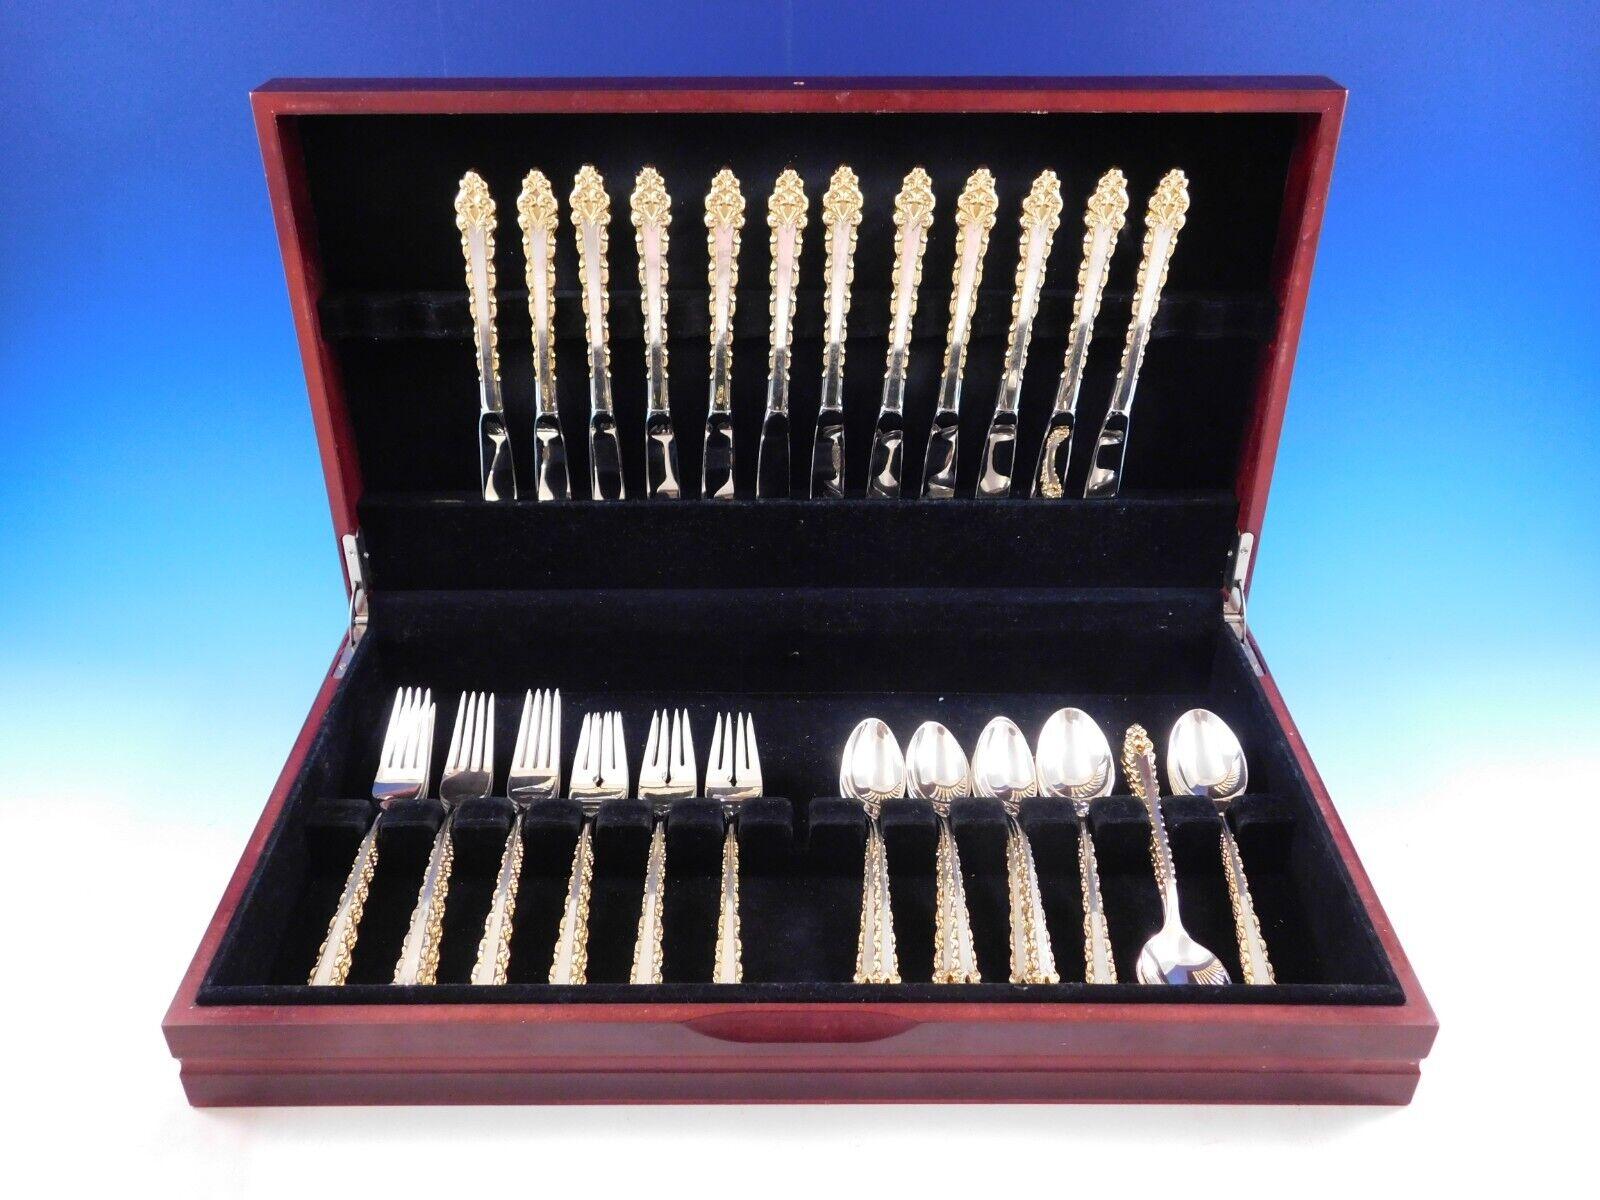 Golden La Strada by International c1972 pierced handle sterling silver with gold accent Flatware set - 60 pieces. This set includes:

12 Knives, 9 1/8
12 Forks, 7 3/4